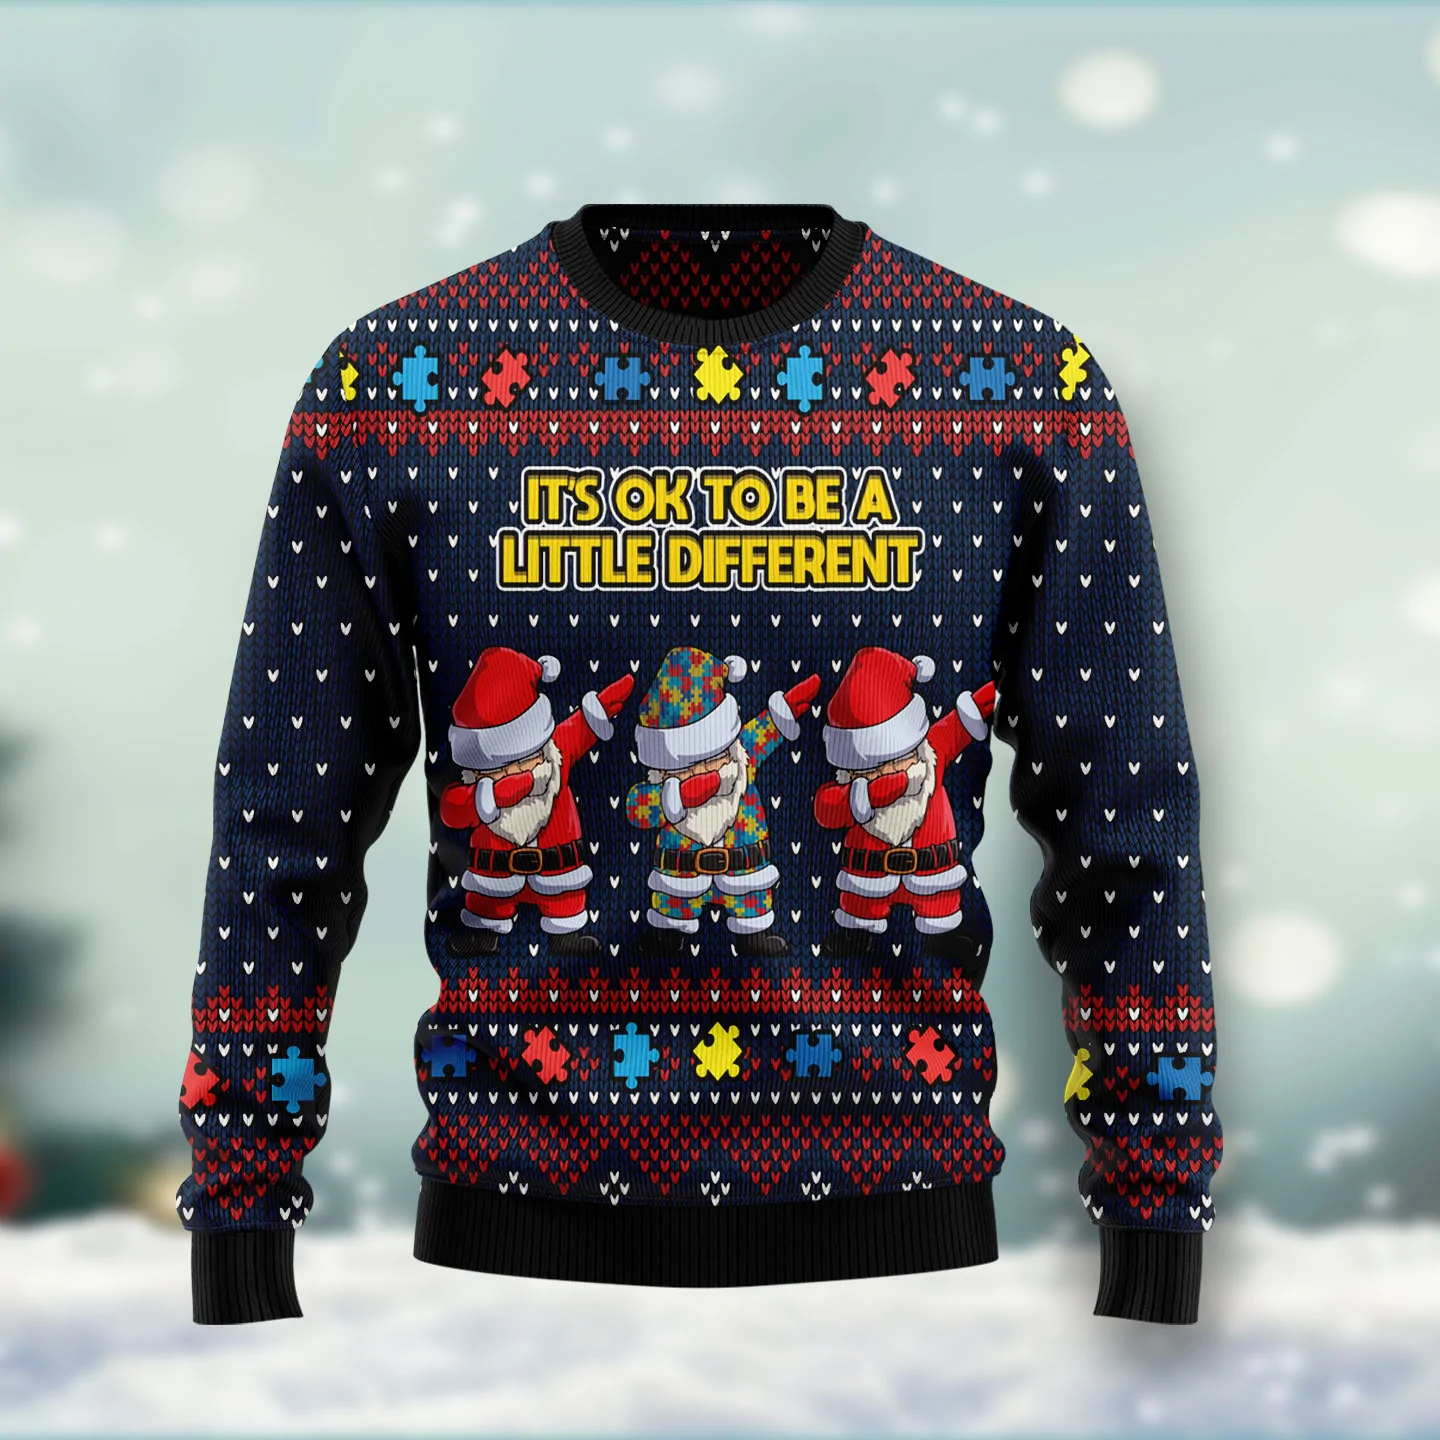 Wayne Is World Have A Merry Schwingmas Ugly Sweater